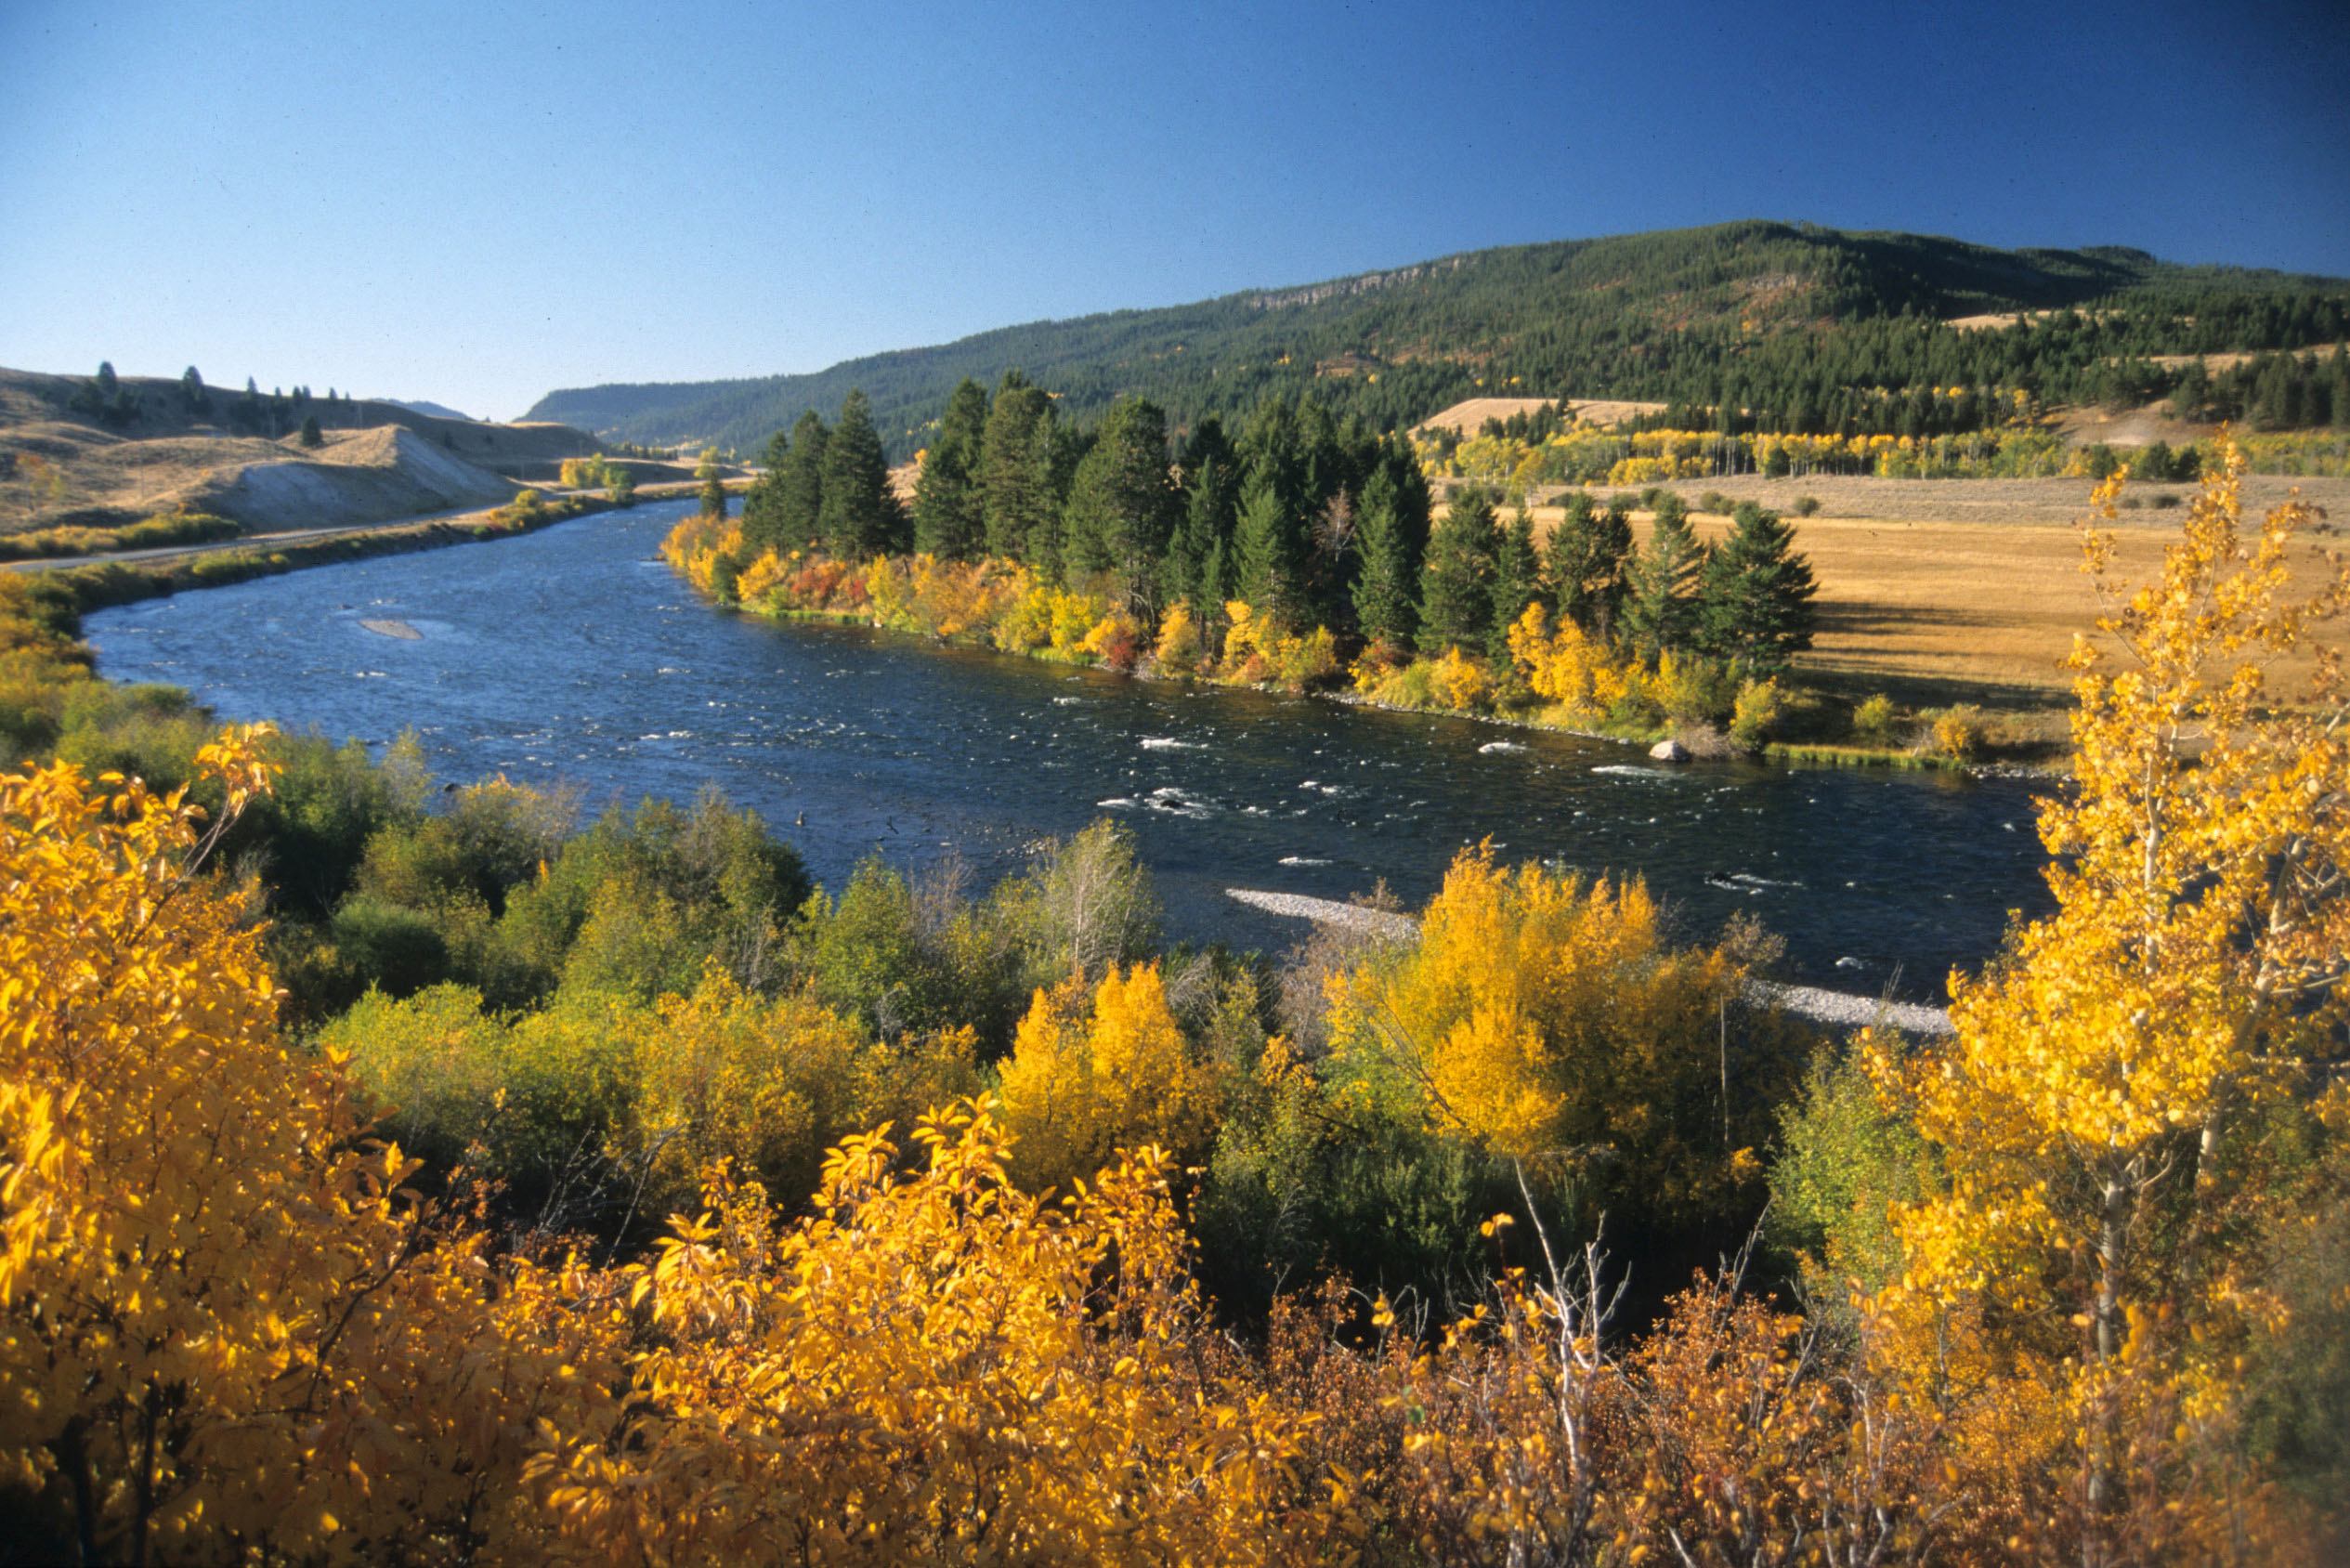 The Madison River flows past autumn foliage upstream from Ennis. (Photo by Rick and Susie Graetz)